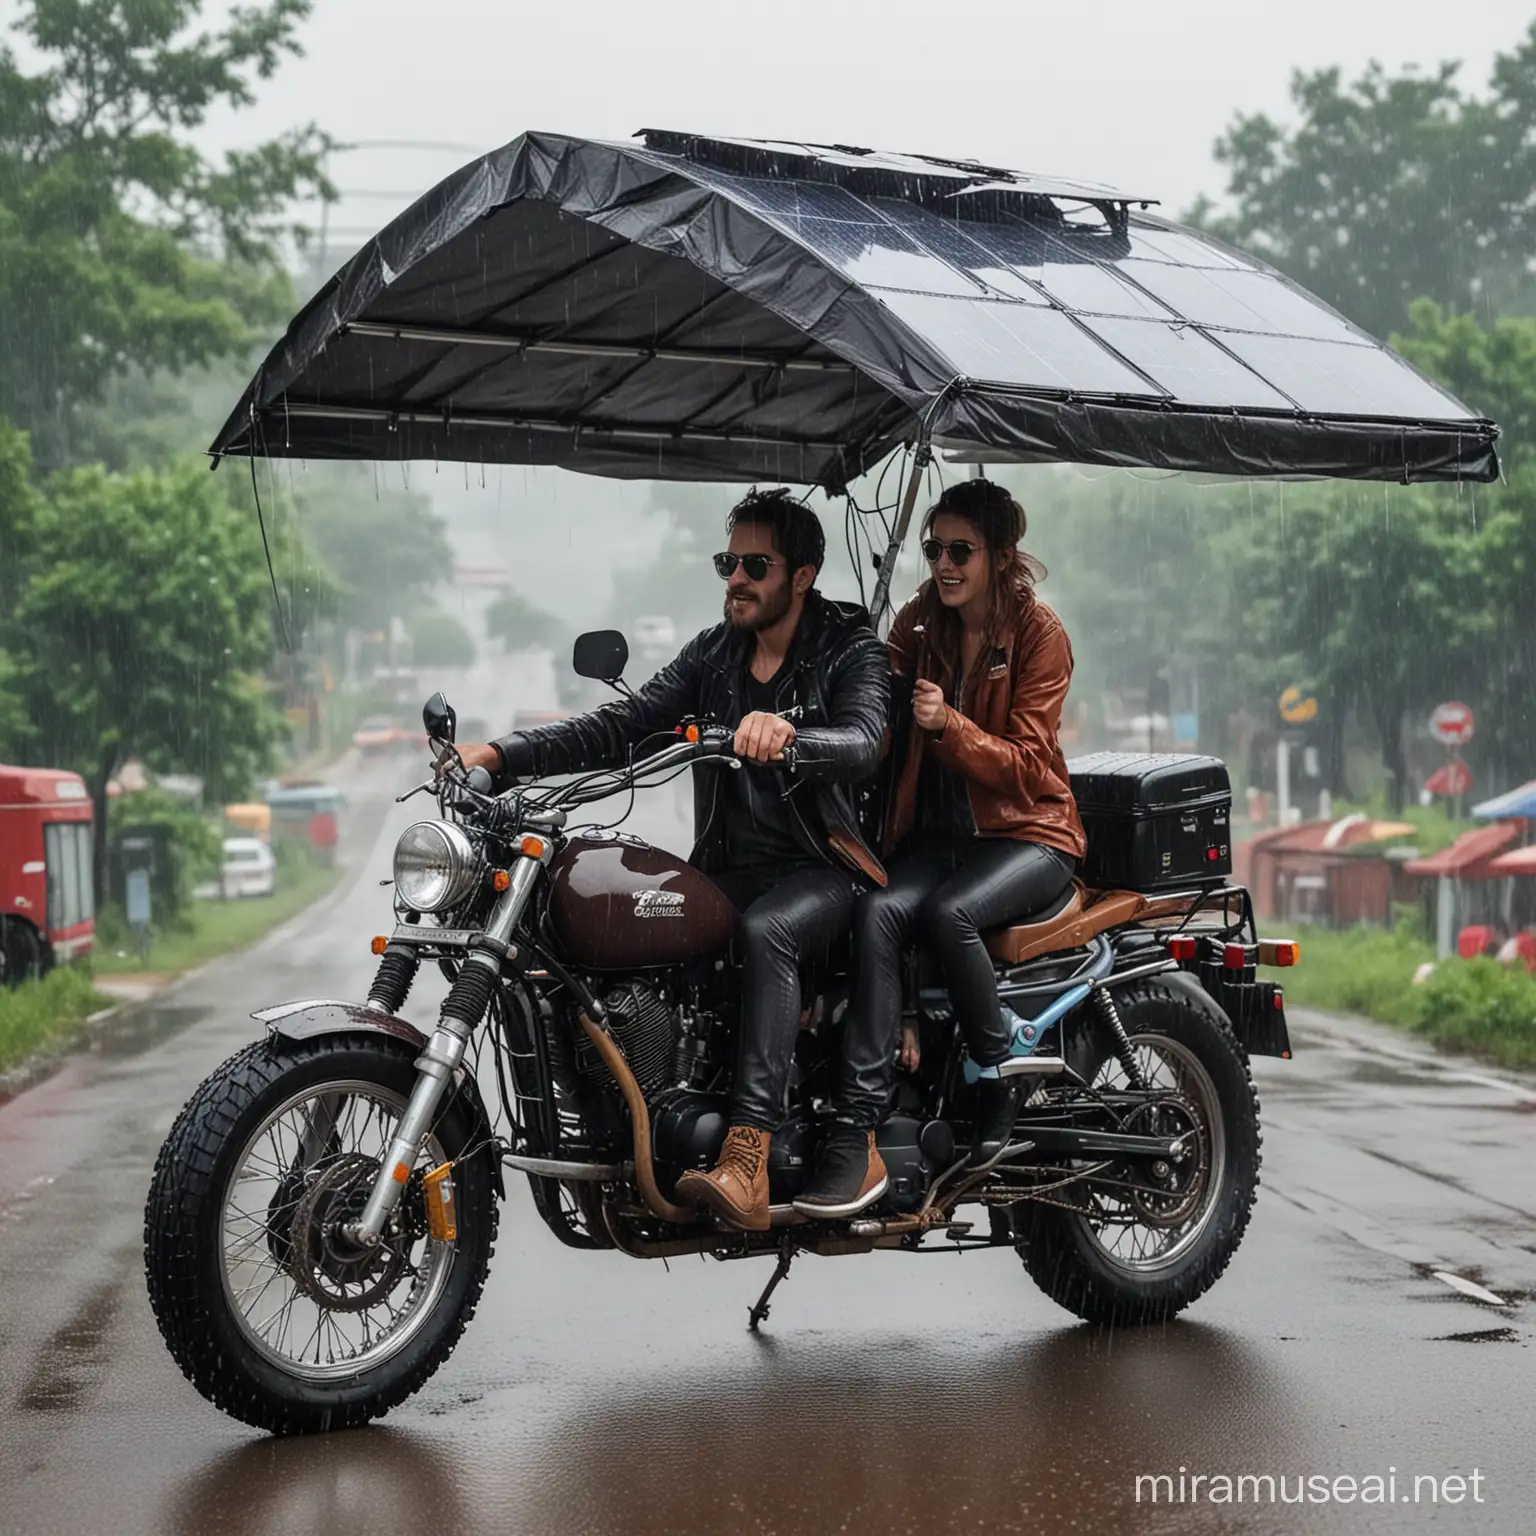 Aesthetic Motorcycle with Roof and Solar Panels Sheltering Two People from Rain